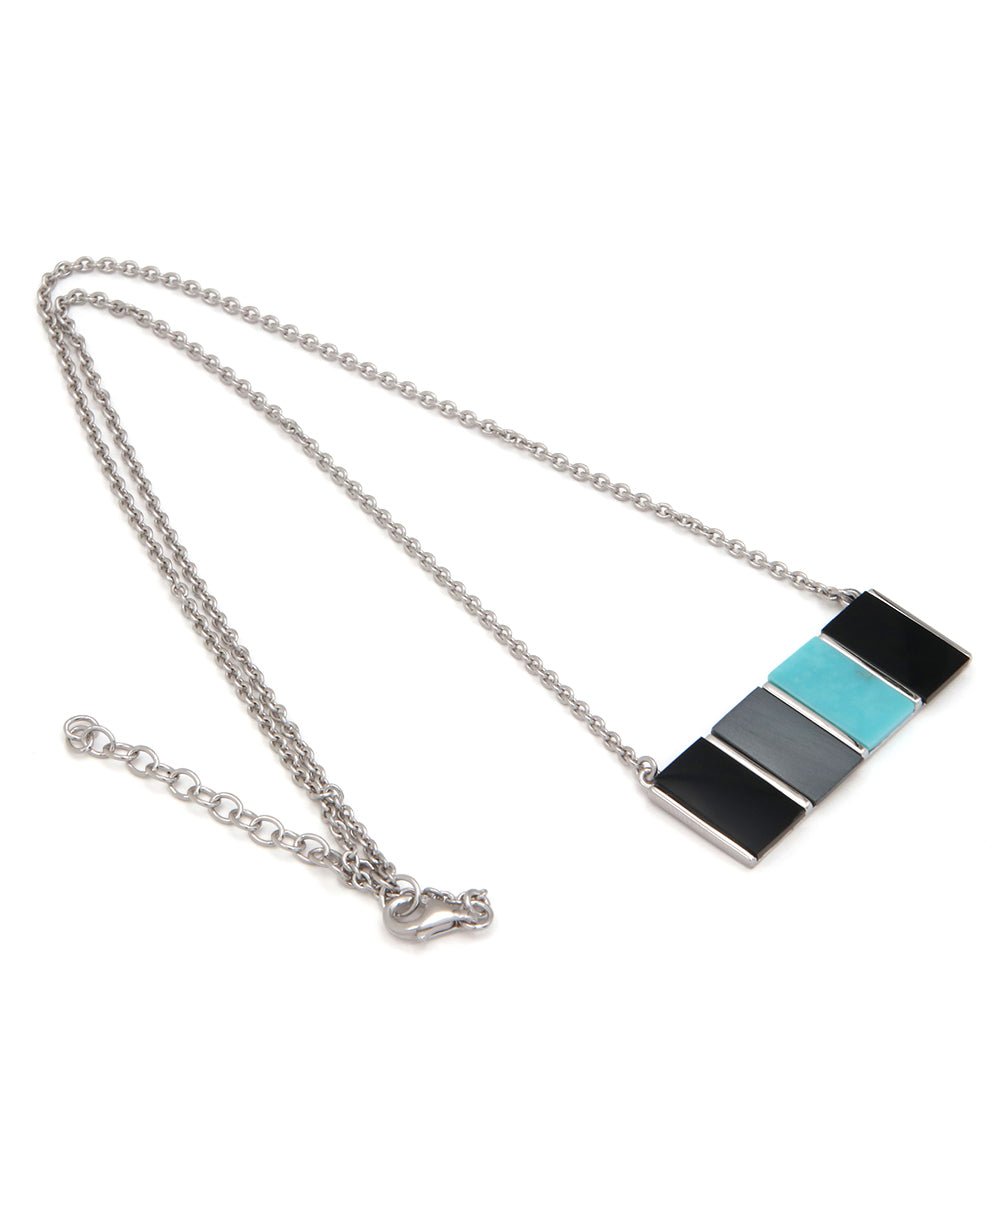 Hematite, Onyx, and Turquoise Protection Necklace - Necklaces